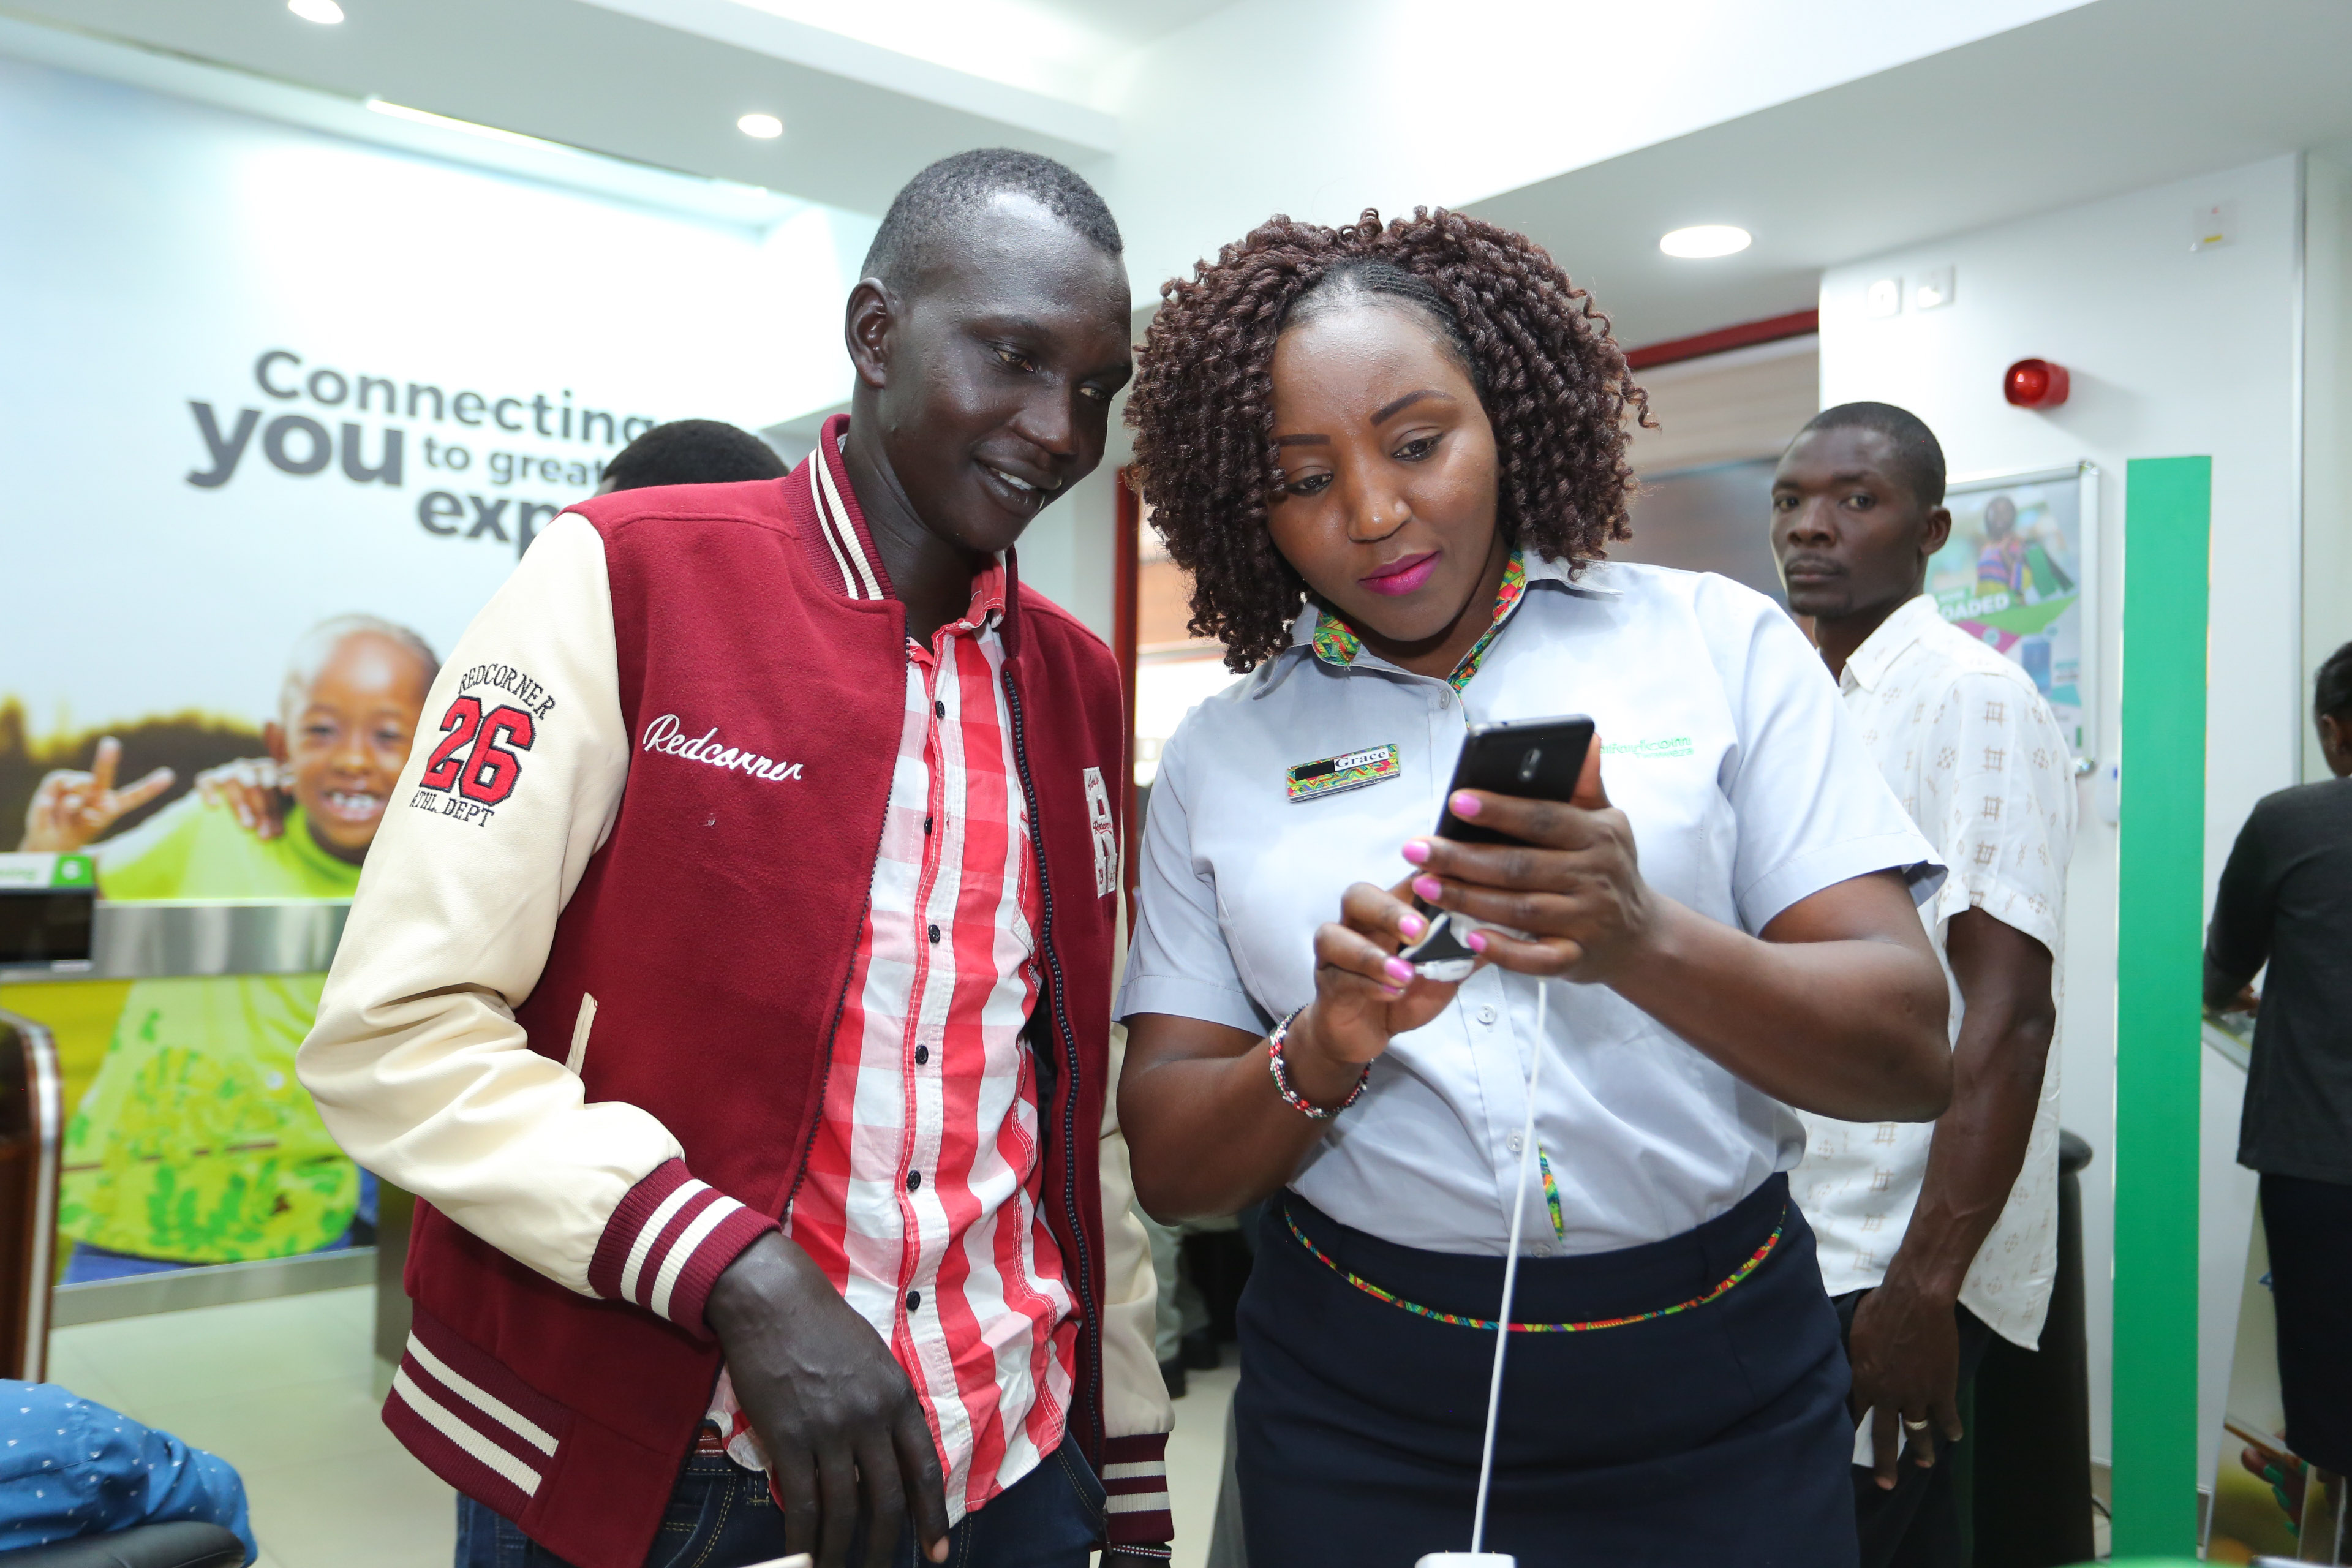 Safaricom Customer experience executive, Grace Wanjiru (right) explains to Jackson Sorkwony (customer) features of some new devices being sold at the newly opened Safaricom Westside Shop in Nakuru - Bizna